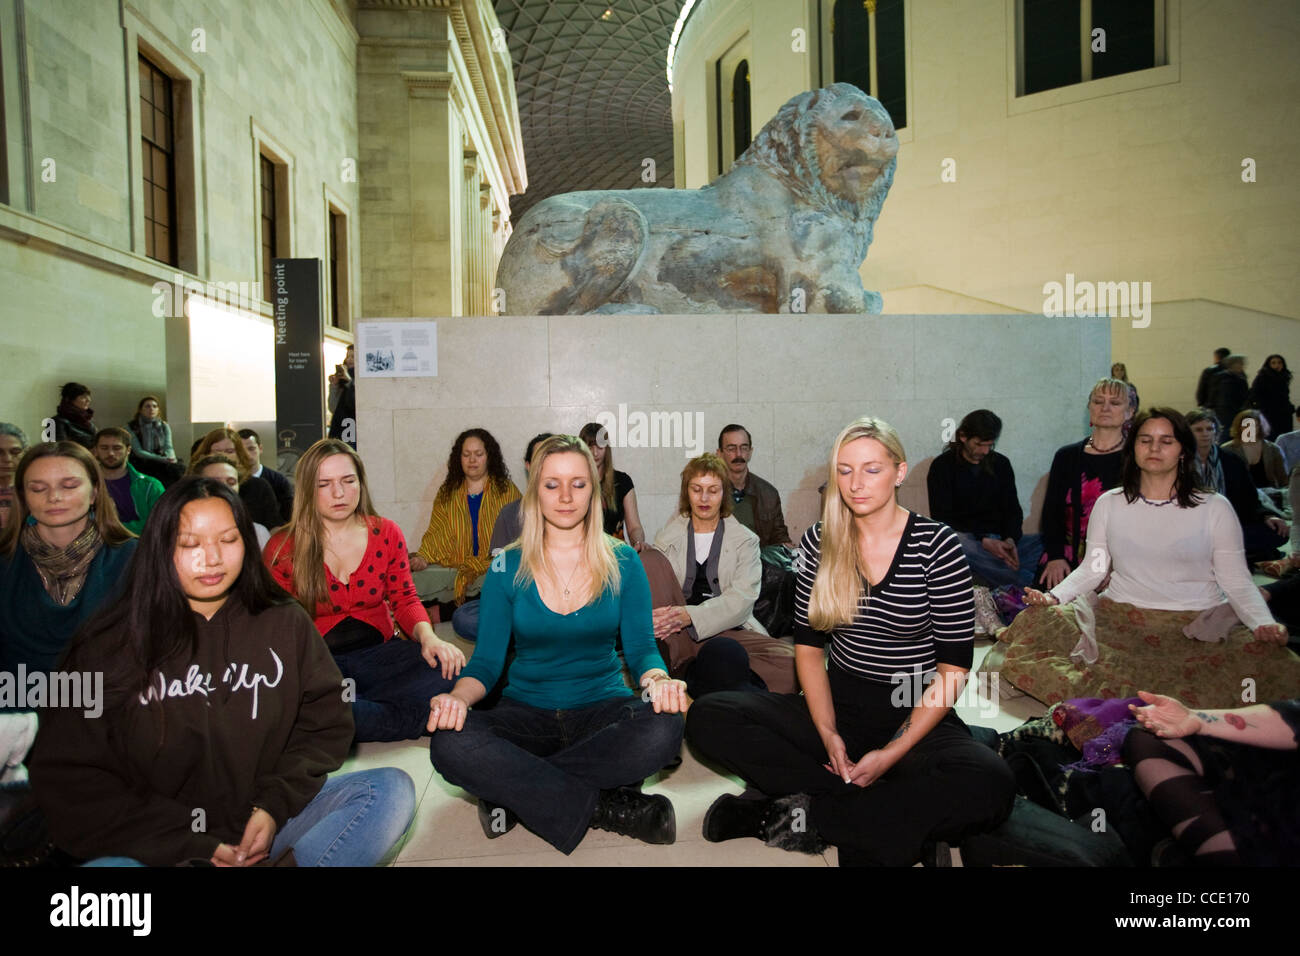 People meditate as part of a meditation flash mob in the Great Court of the British Museum beneath a stone lion statue Stock Photo